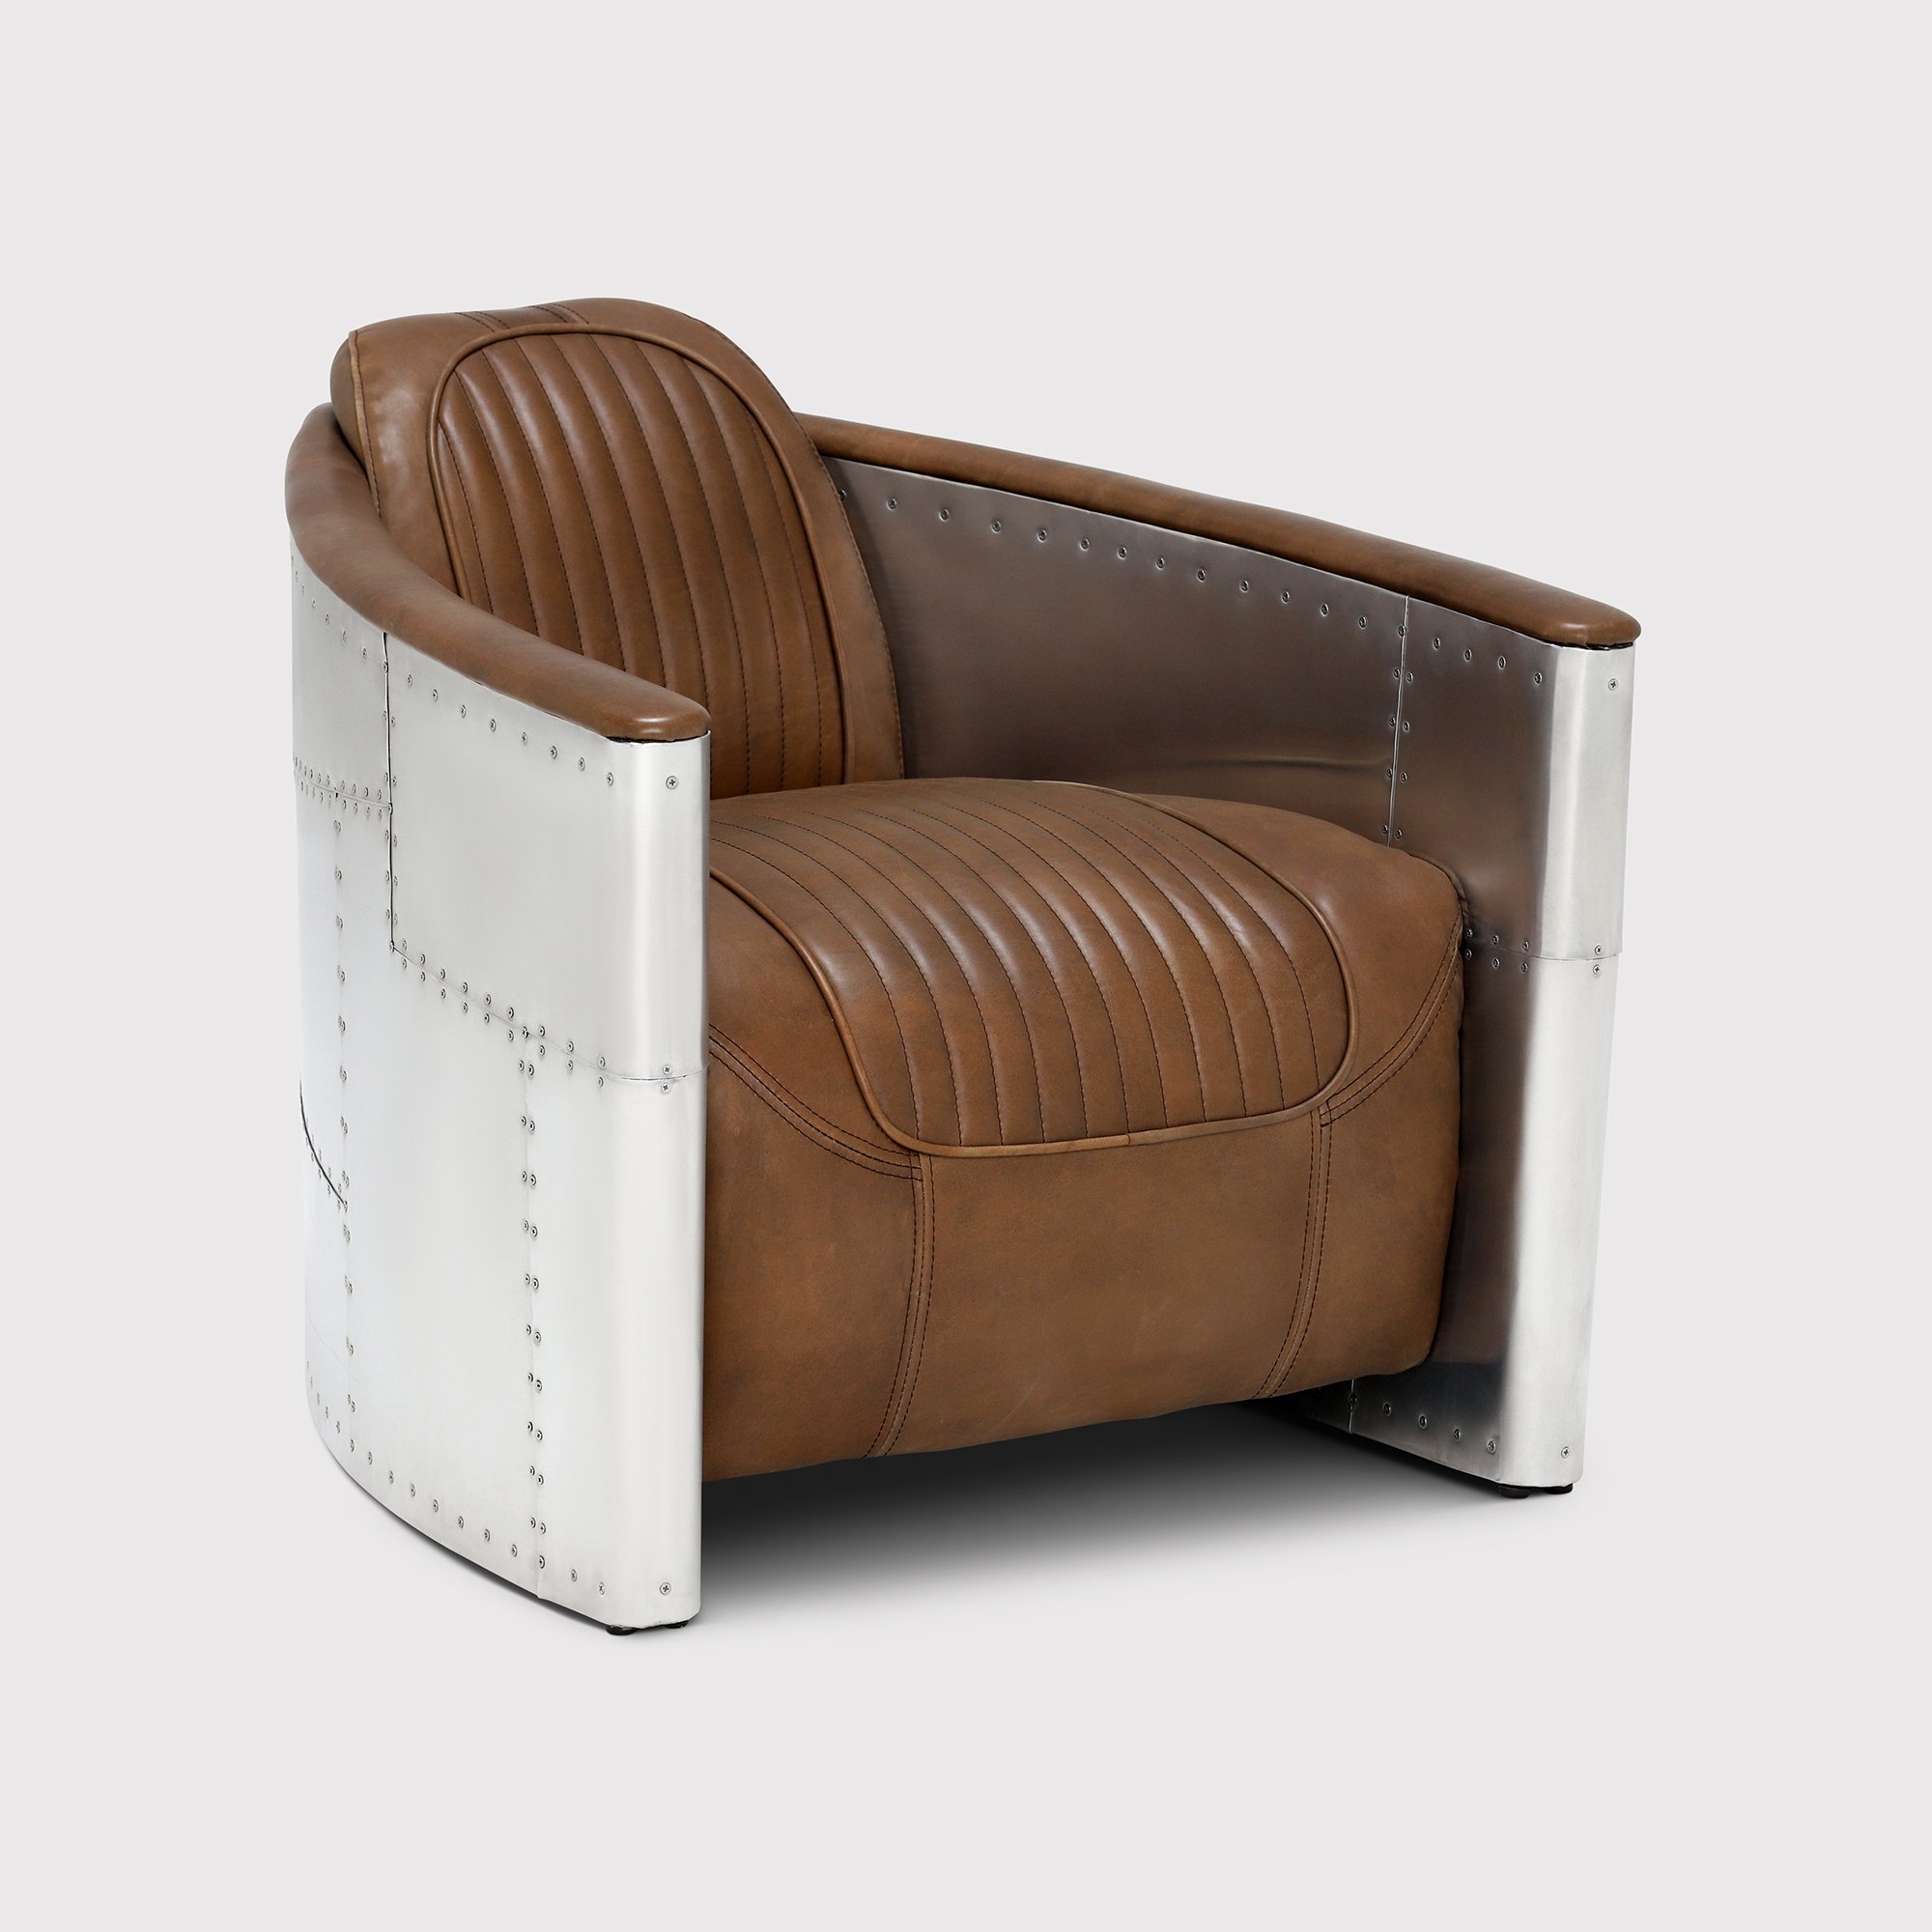 Timothy Oulton Aviator Tomcat Armchair, Brown Leather | Barker & Stonehouse